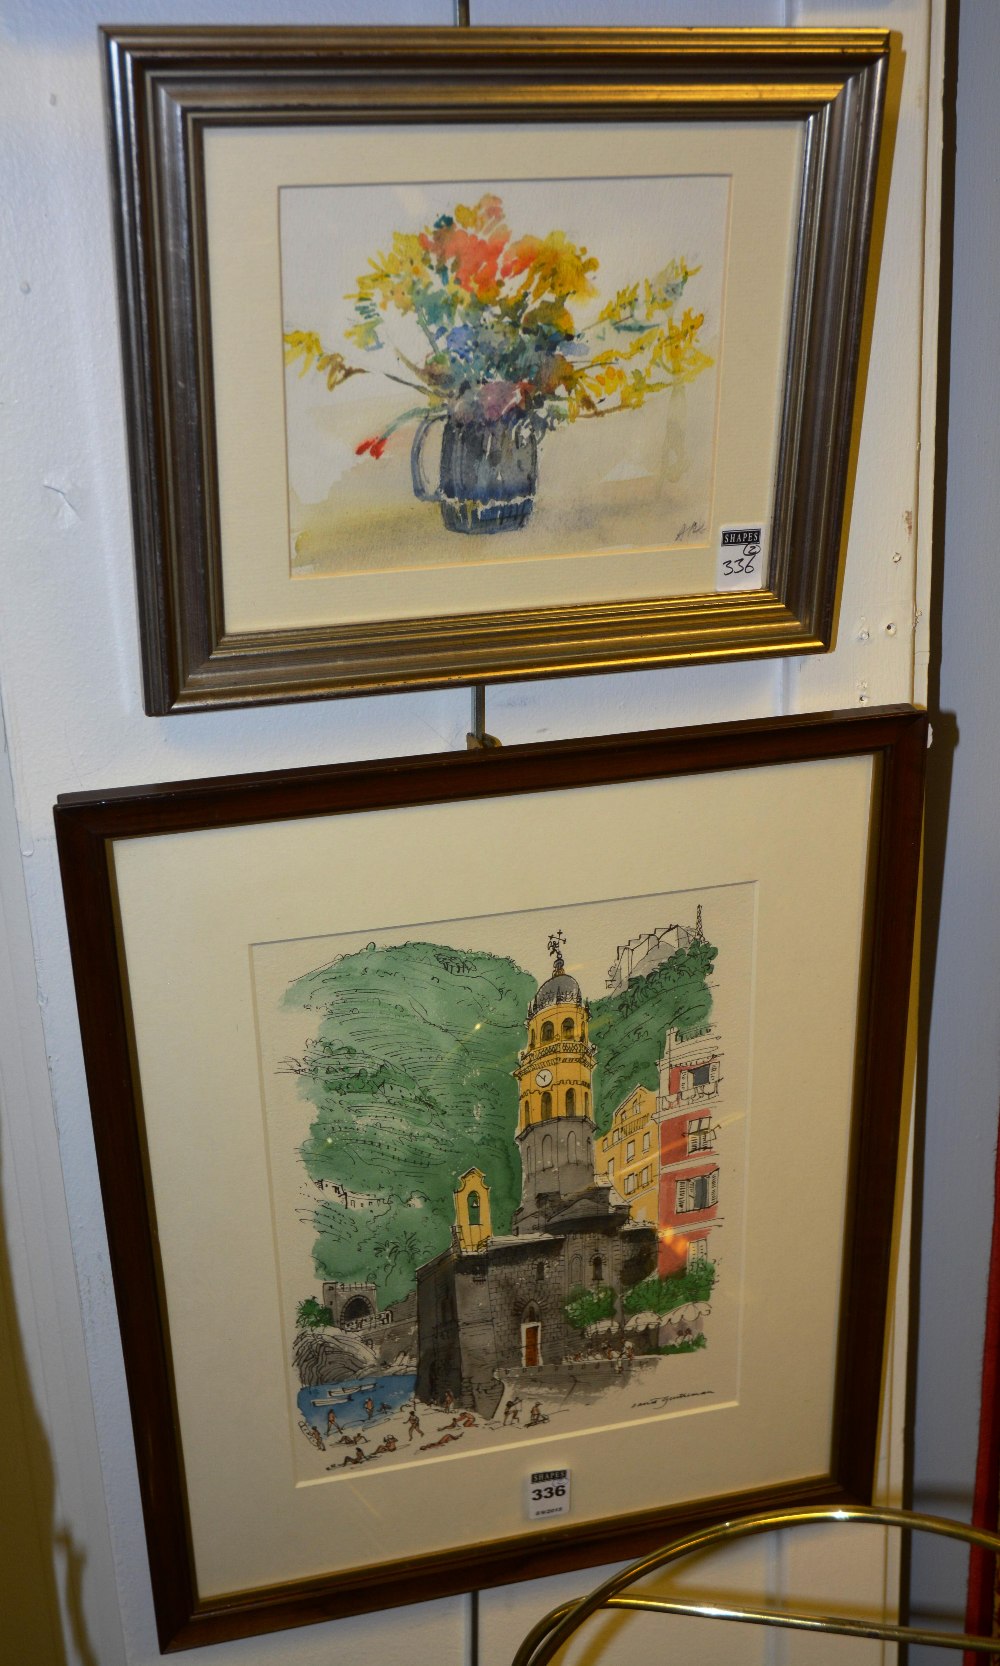 David Gentleman
'Vernazza'
Signed lower right, 30 x 23cm, together with a watercolour of 'Spring